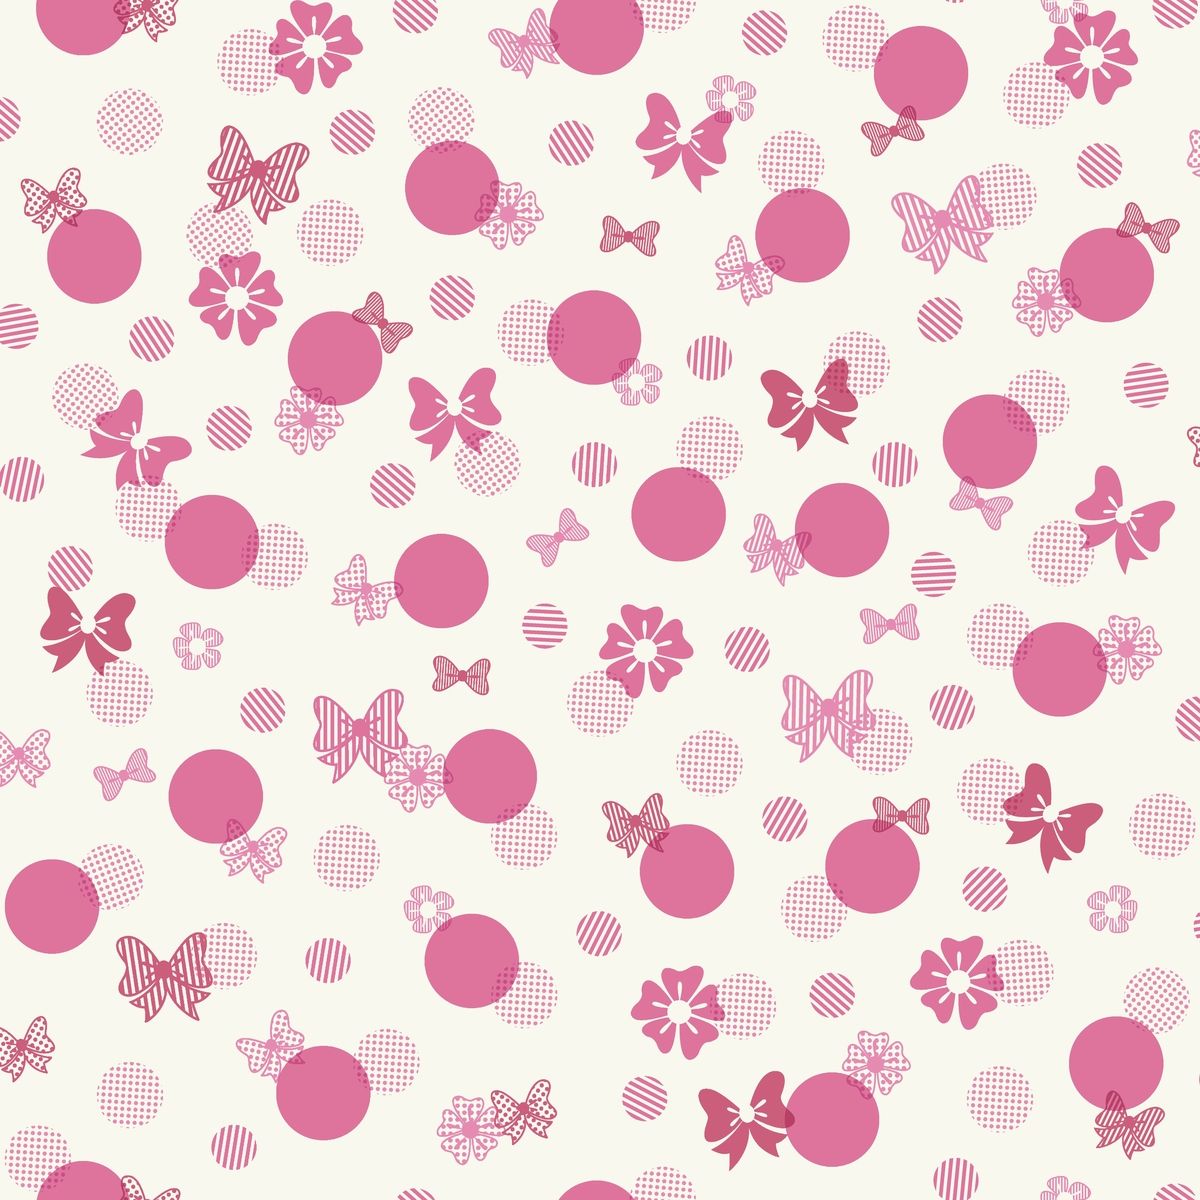 Minnie Mouse Dots Wallpapers Wallpaper Cave